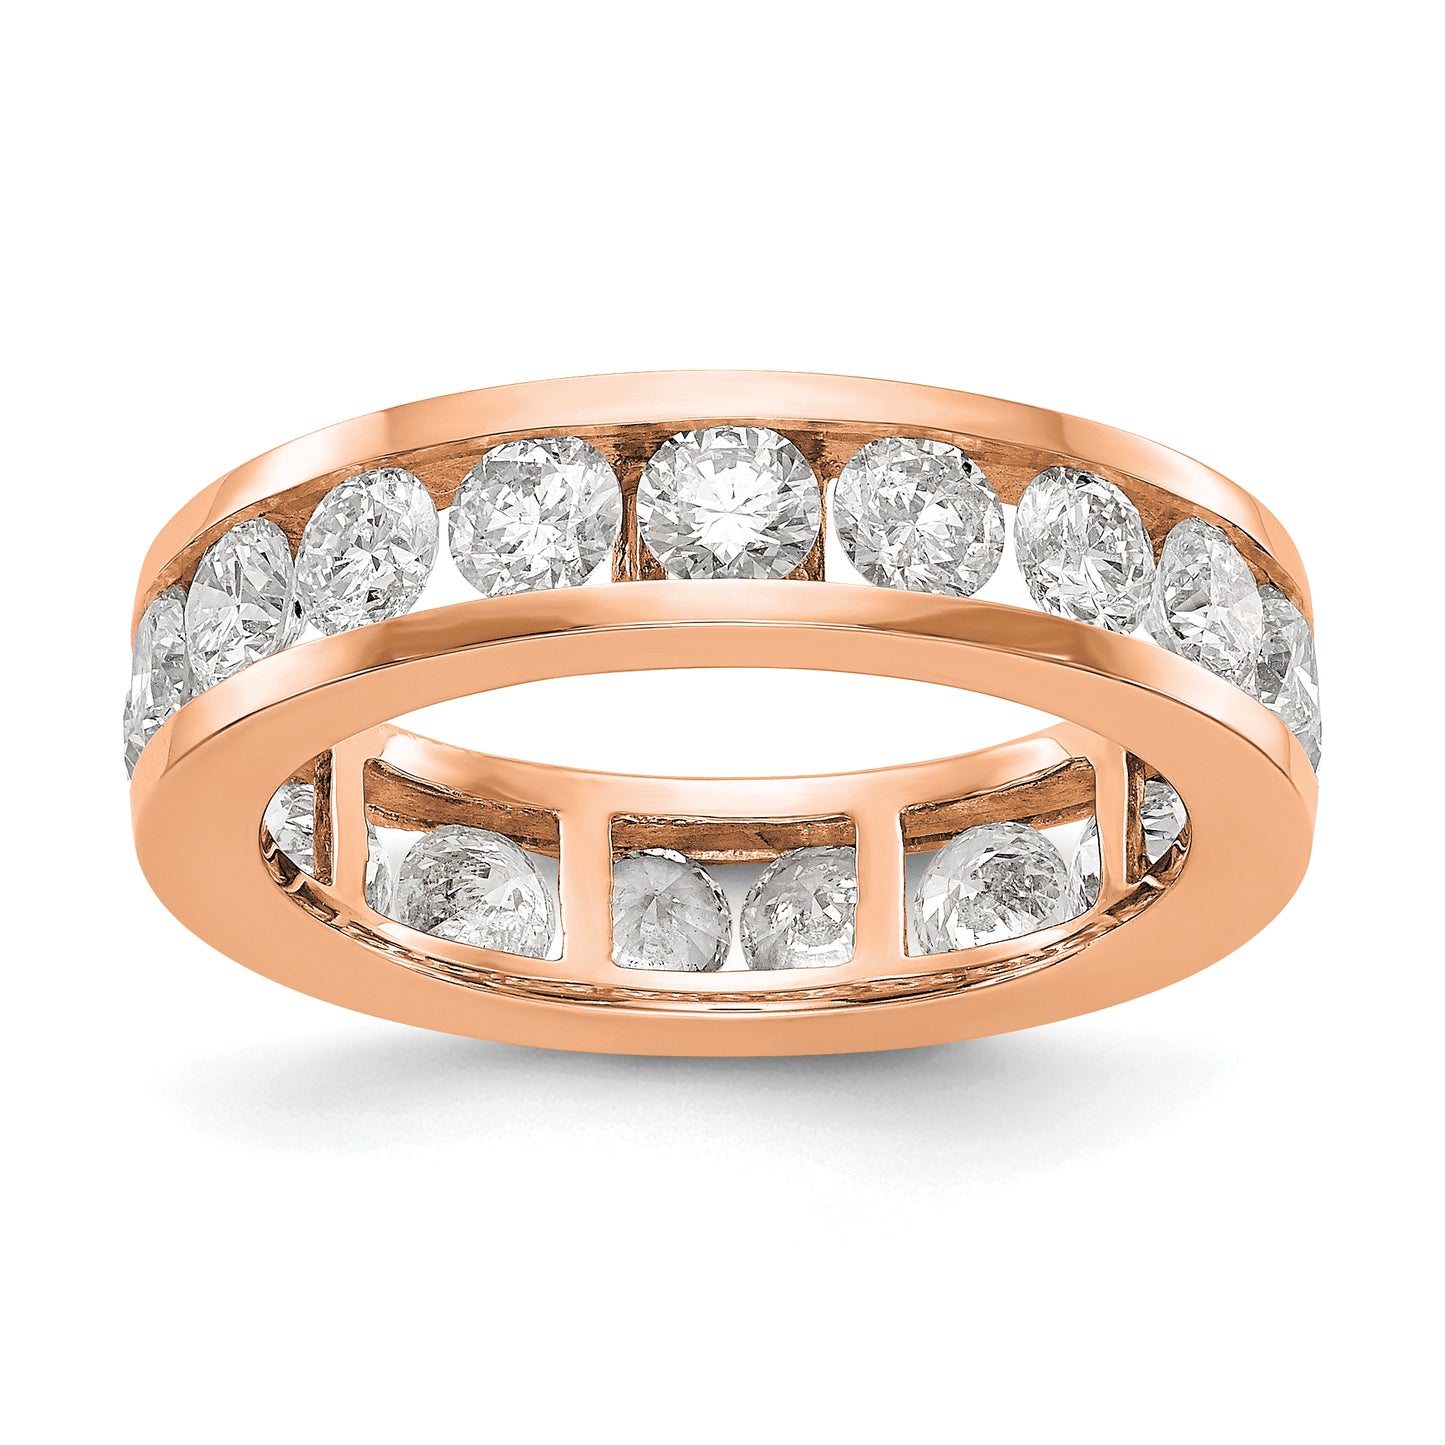 2 Ct. Natural Diamond Womens Eternity Anniversary Wedding Band Ring in 14k Rose Gold